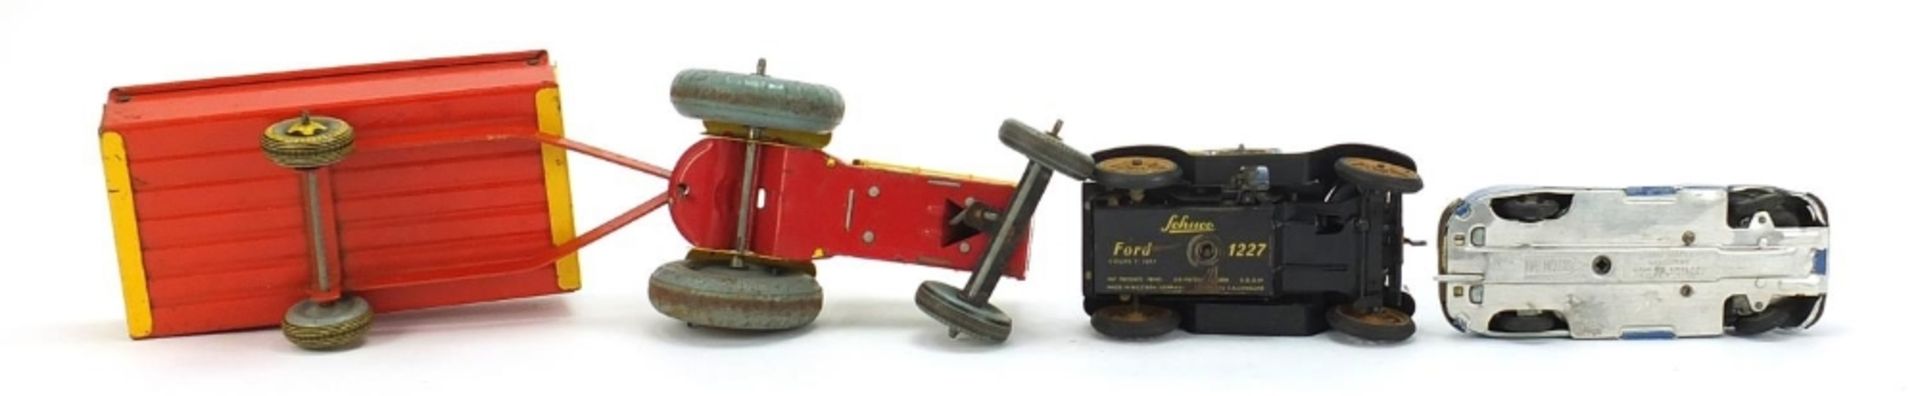 Antique and later tinplate toys comprising a Schuco Ford Coupet 1917, Chad Valley Harborme car and a - Image 5 of 6